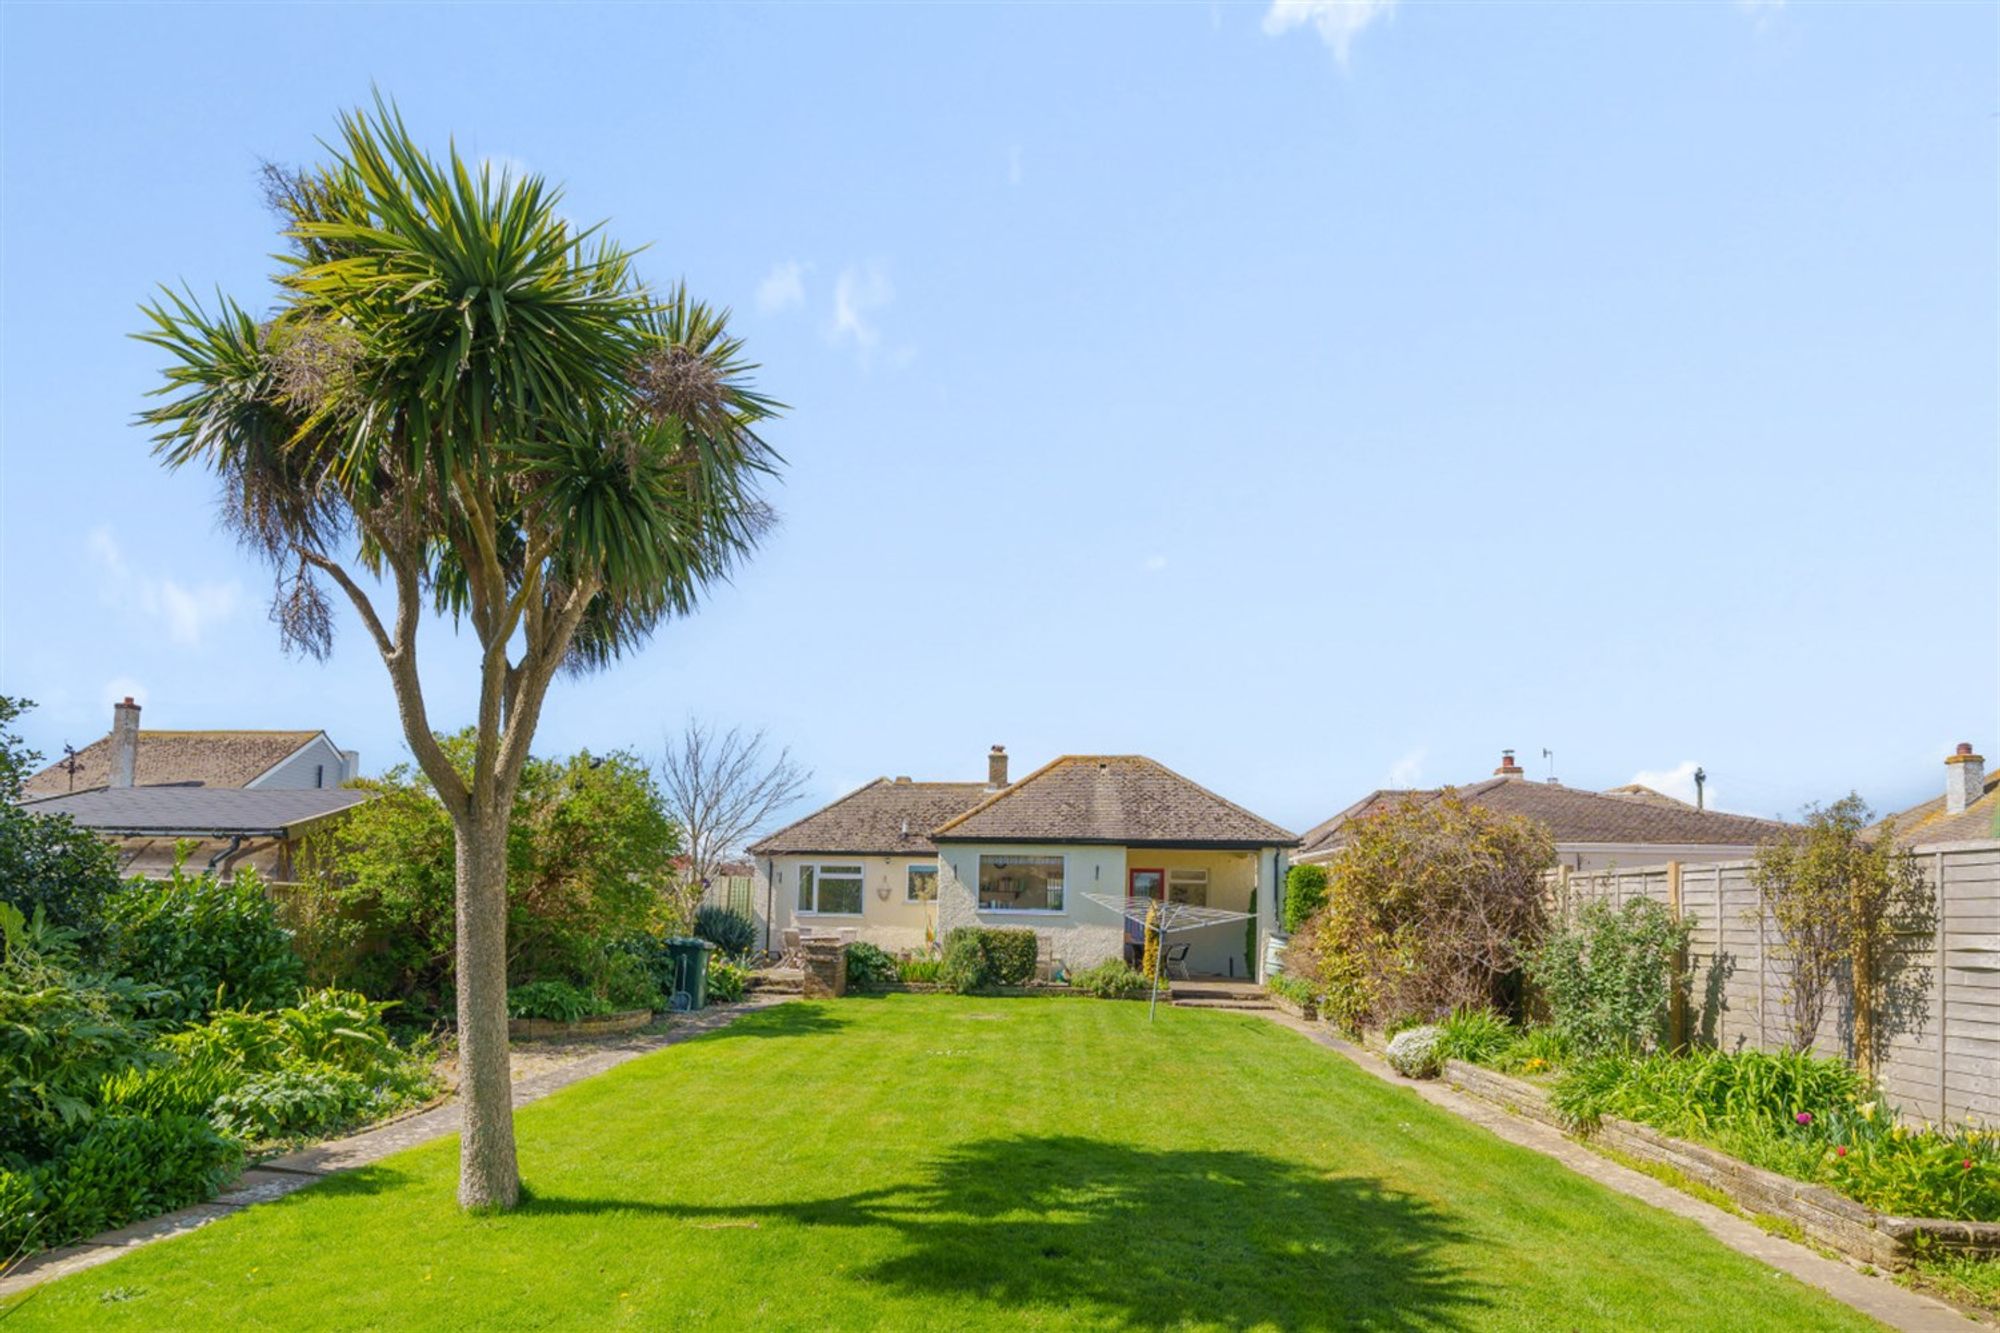 Orchard Avenue, Selsey, PO20